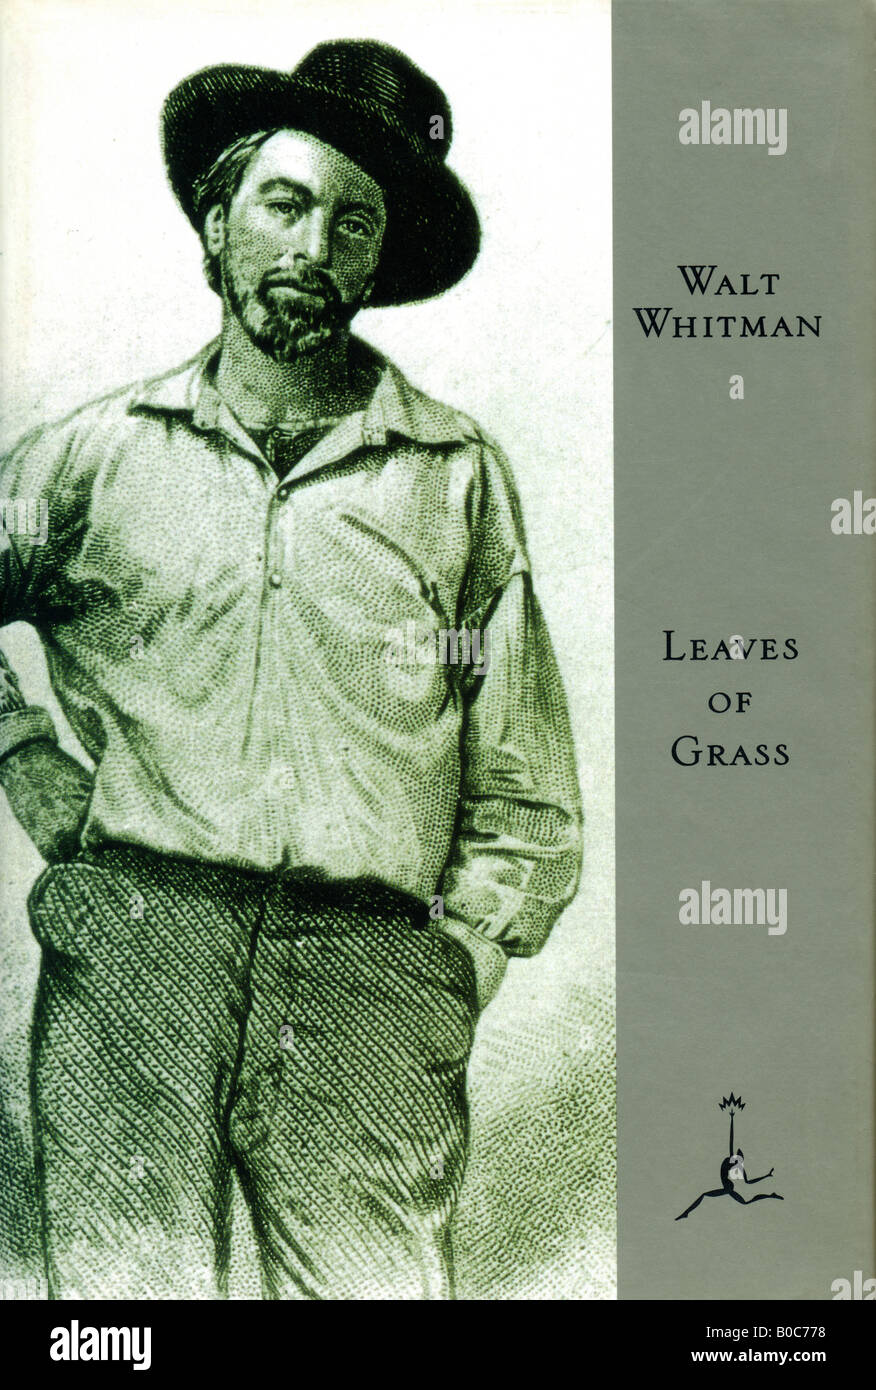 Walt Whitman Poetry Book Leaves of Grass Hardback book with cover Modern Library Edition 1993 FOR EDITORIAL USE ONLY Stock Photo